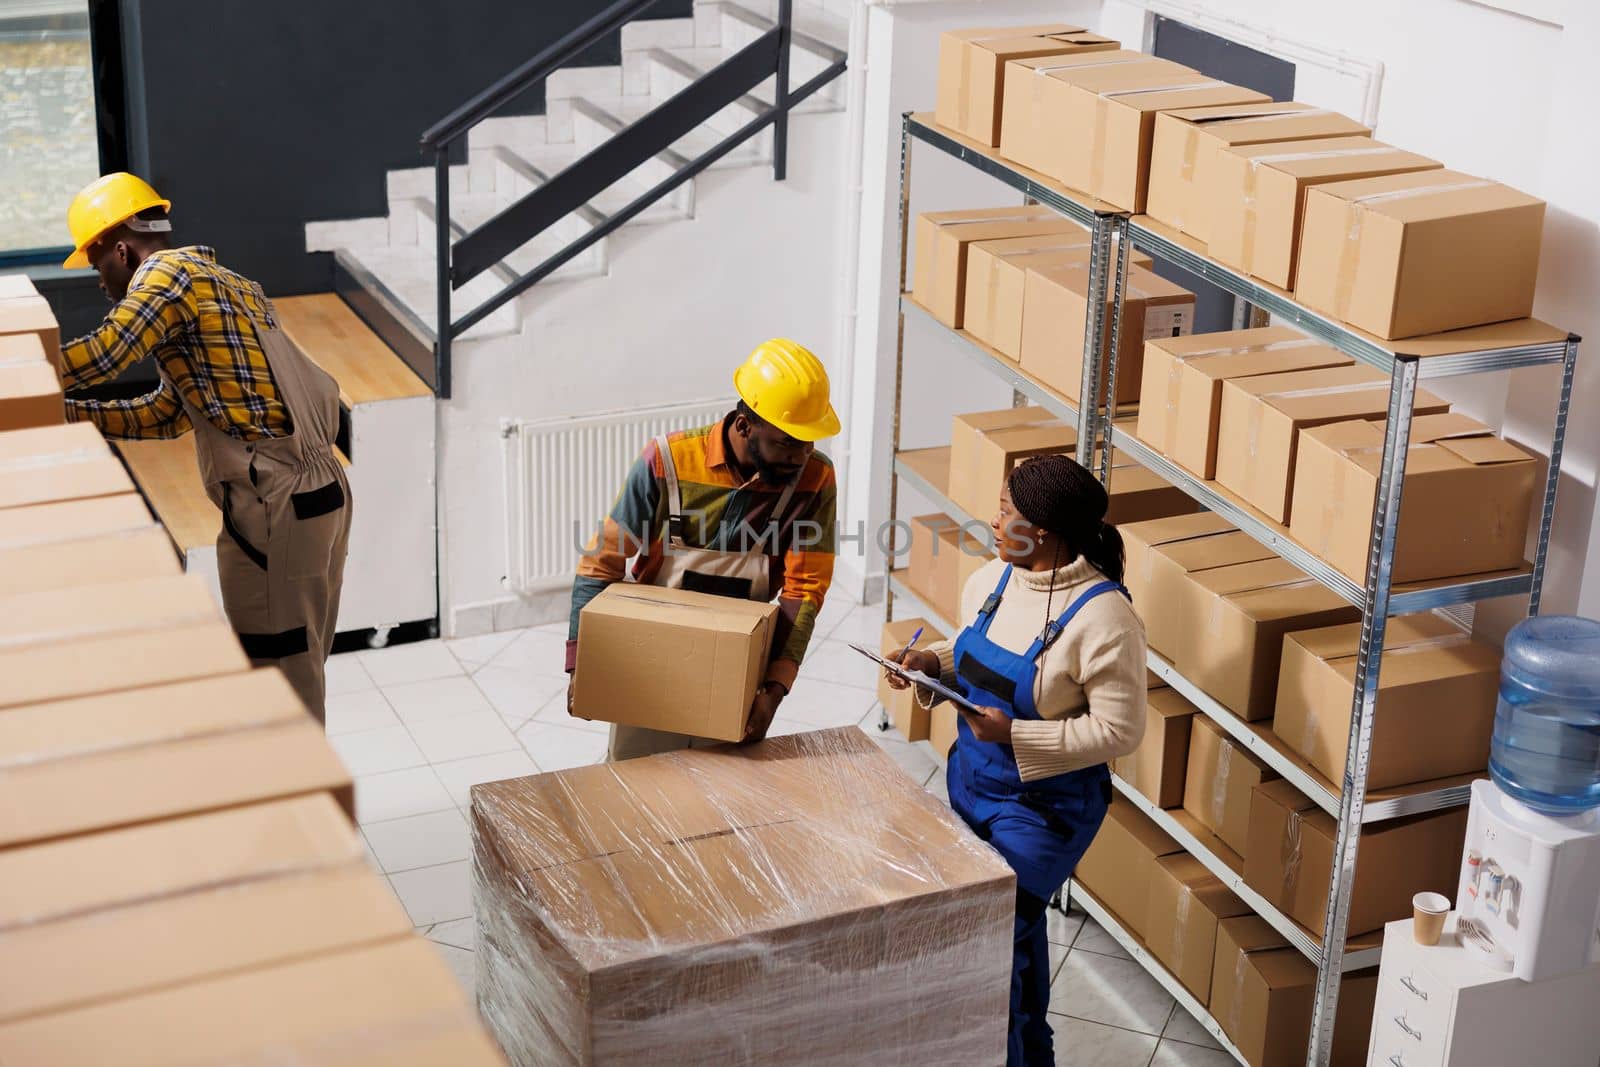 Package handler holding parcel and talking with supervisor in warehouse. African american logistics manager inspecting freight transportation and checking cardboard box in storehouse